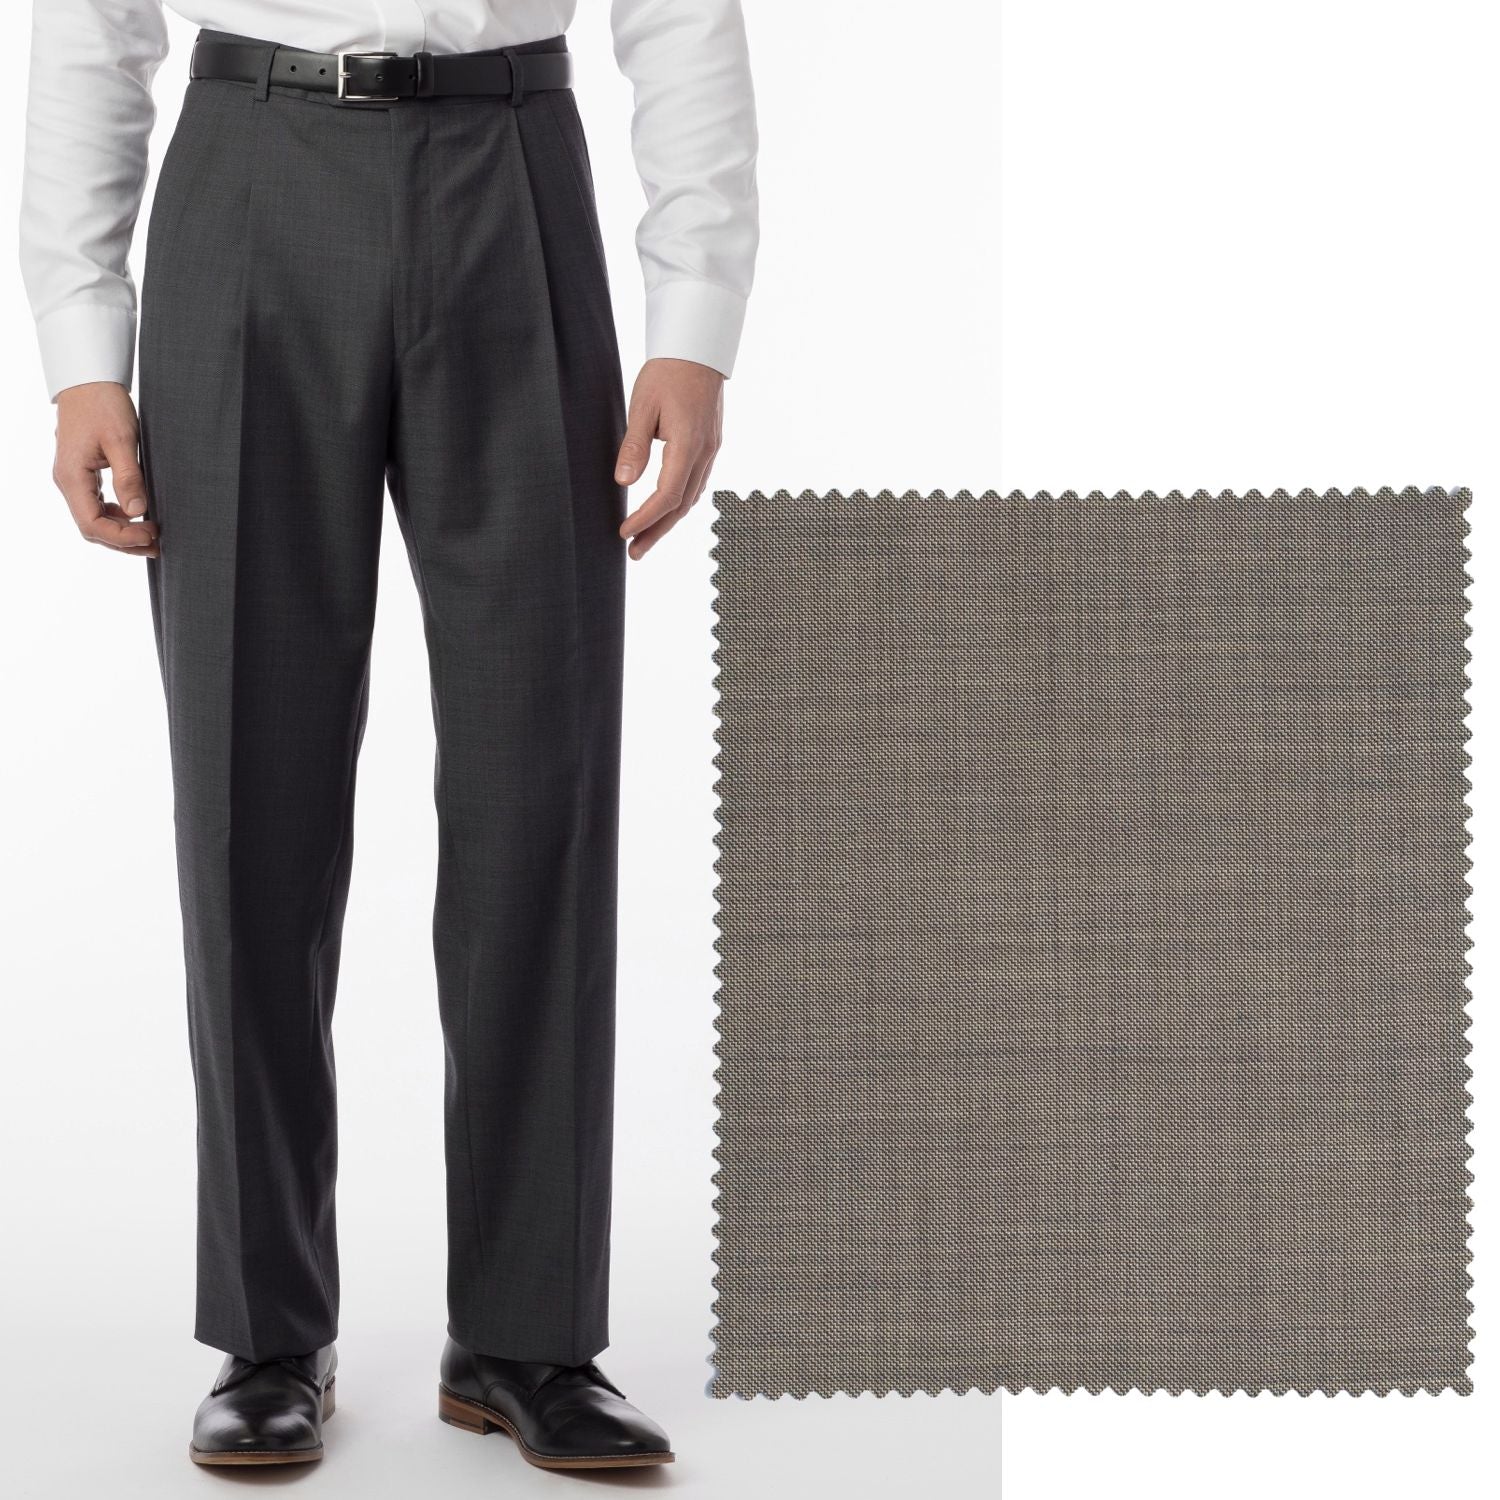 Sharkskin Super 120s Worsted Wool Comfort-EZE Trouser in British Tan (Manchester Pleated Model) by Ballin